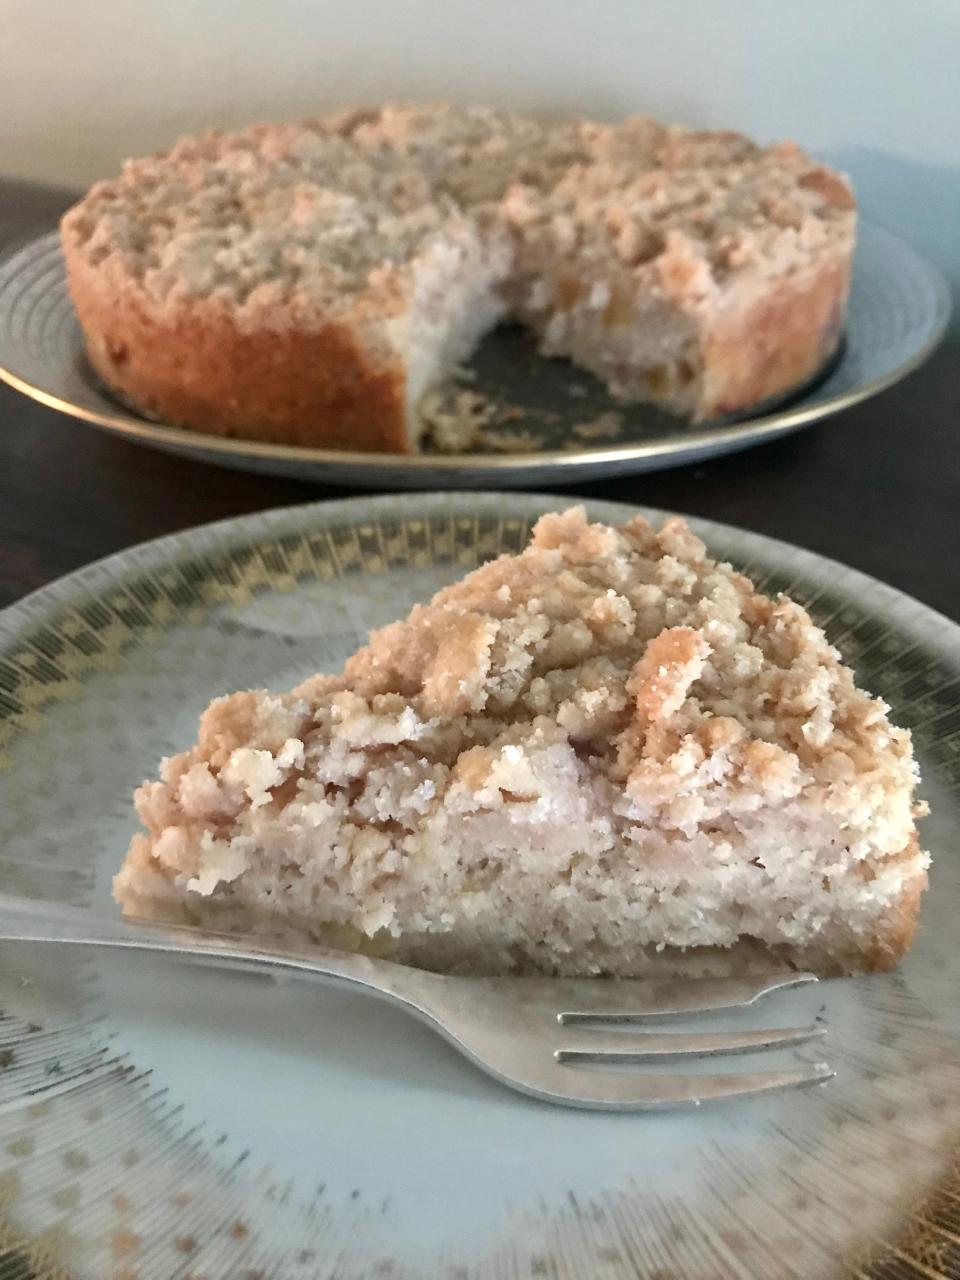 Apple sour cream crumb cake from "The Sweeter Side of Sourdough" has discard starter in the crumb topping and active starter in the batter. Apples keep the cake moist.